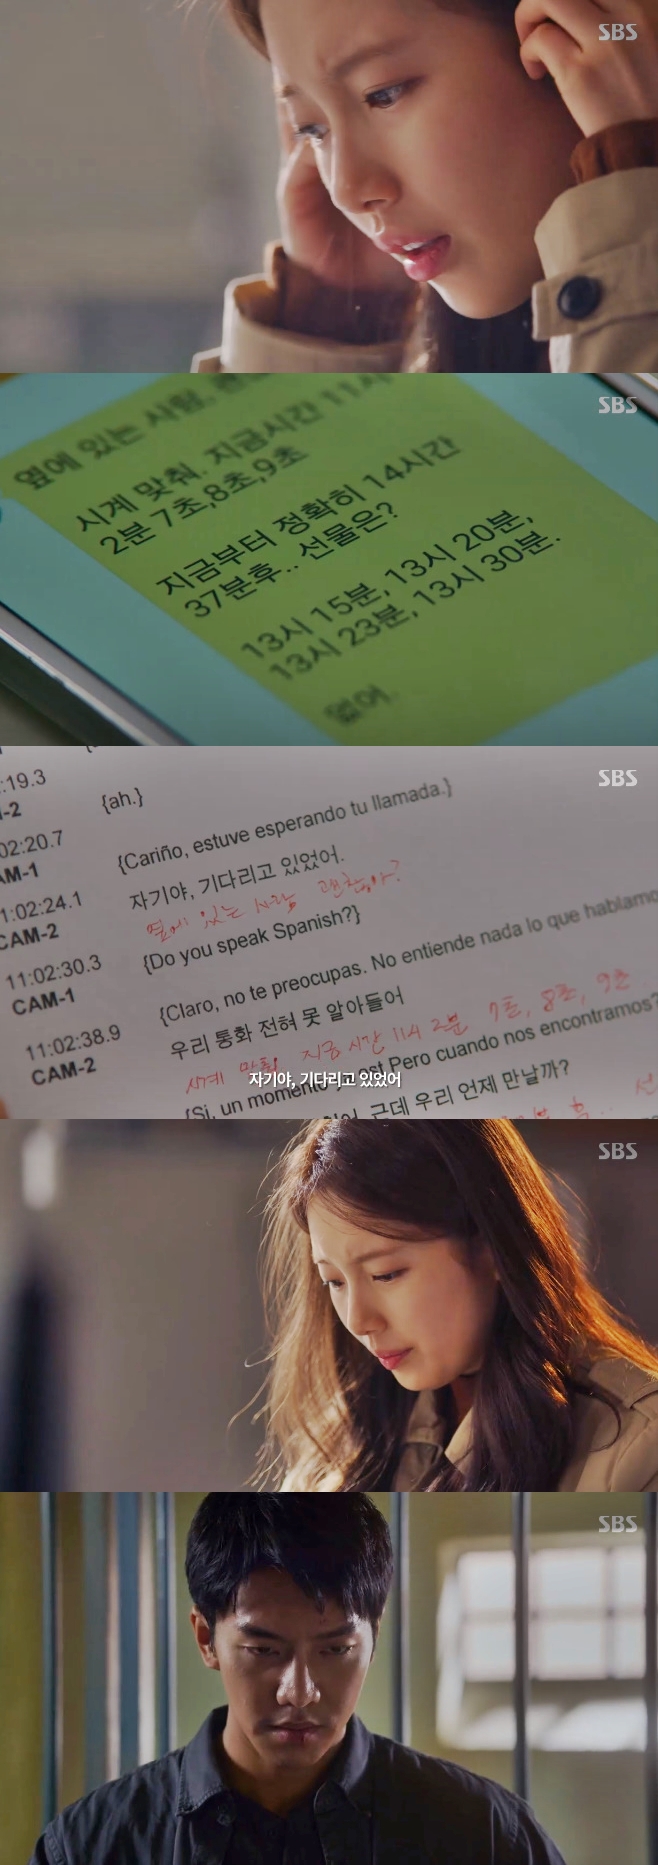 In Vagabond, Bae Suzy captured evidence of the terror circumstances that Lee Seung-gi has claimed.In the SBS gilt drama Vagabond (playplayed by Jang Young-chul and directed by Yoo In-sik), which aired on the 21st night, Cha Dal-gun (Lee Seung-gi), who left for Morocco to recover the remains of his nephew who died in the Planes accident, was portrayed.On the day of the broadcast, Cha Dal-geon found out that the man in the video sent by his nephew just before Planes took off was alive and walking Morocco.To airline employees and bereaved families, the Planes accident was caused by a terror, and with the help of the embassy, even confirmed airport CCTV.But the person he claimed to be alive was not on CCTV. Cha Dal-geons claim was dismissed as a madmans word.Chadalgan handed over the video to the confessional (Bae Suzy), who witnessed the man with him, which included the last image of his nephew.In the process, he broke into the house of Gohari, and while he was searching the house to see that Gohari was not in league with the terro, he realized that Gohari was an NIS agent.Since then, Gohari has felt guilty about Cha Dal-geons words, You are also responsible, and has asked a member of the NIS of Korea to analyze the video.After the memorial service, the families returned to Korea, but the car was left in Morocco. When he returned to his quarters, he tried to spread his nephews video on the Internet.But I was embarrassed to find that the video was erased.Cha Dal-gun, who learned that the room was also stolen and the laptop was missing, was arrested by local police for allegedly fighting a hotel employee and was detained in a detention center.Meanwhile, Ko Hae-ri secured the voice of the Planes black box with the help of the NIS director.He heard the bookkeeper talking in Spanish before takeoff and then he remembered that the man in the video analyzed by his NIS colleague had spoken in Spanish.He began to compare the two conversations and inferred that they were conversations of terrorists disguised as lover conversations.